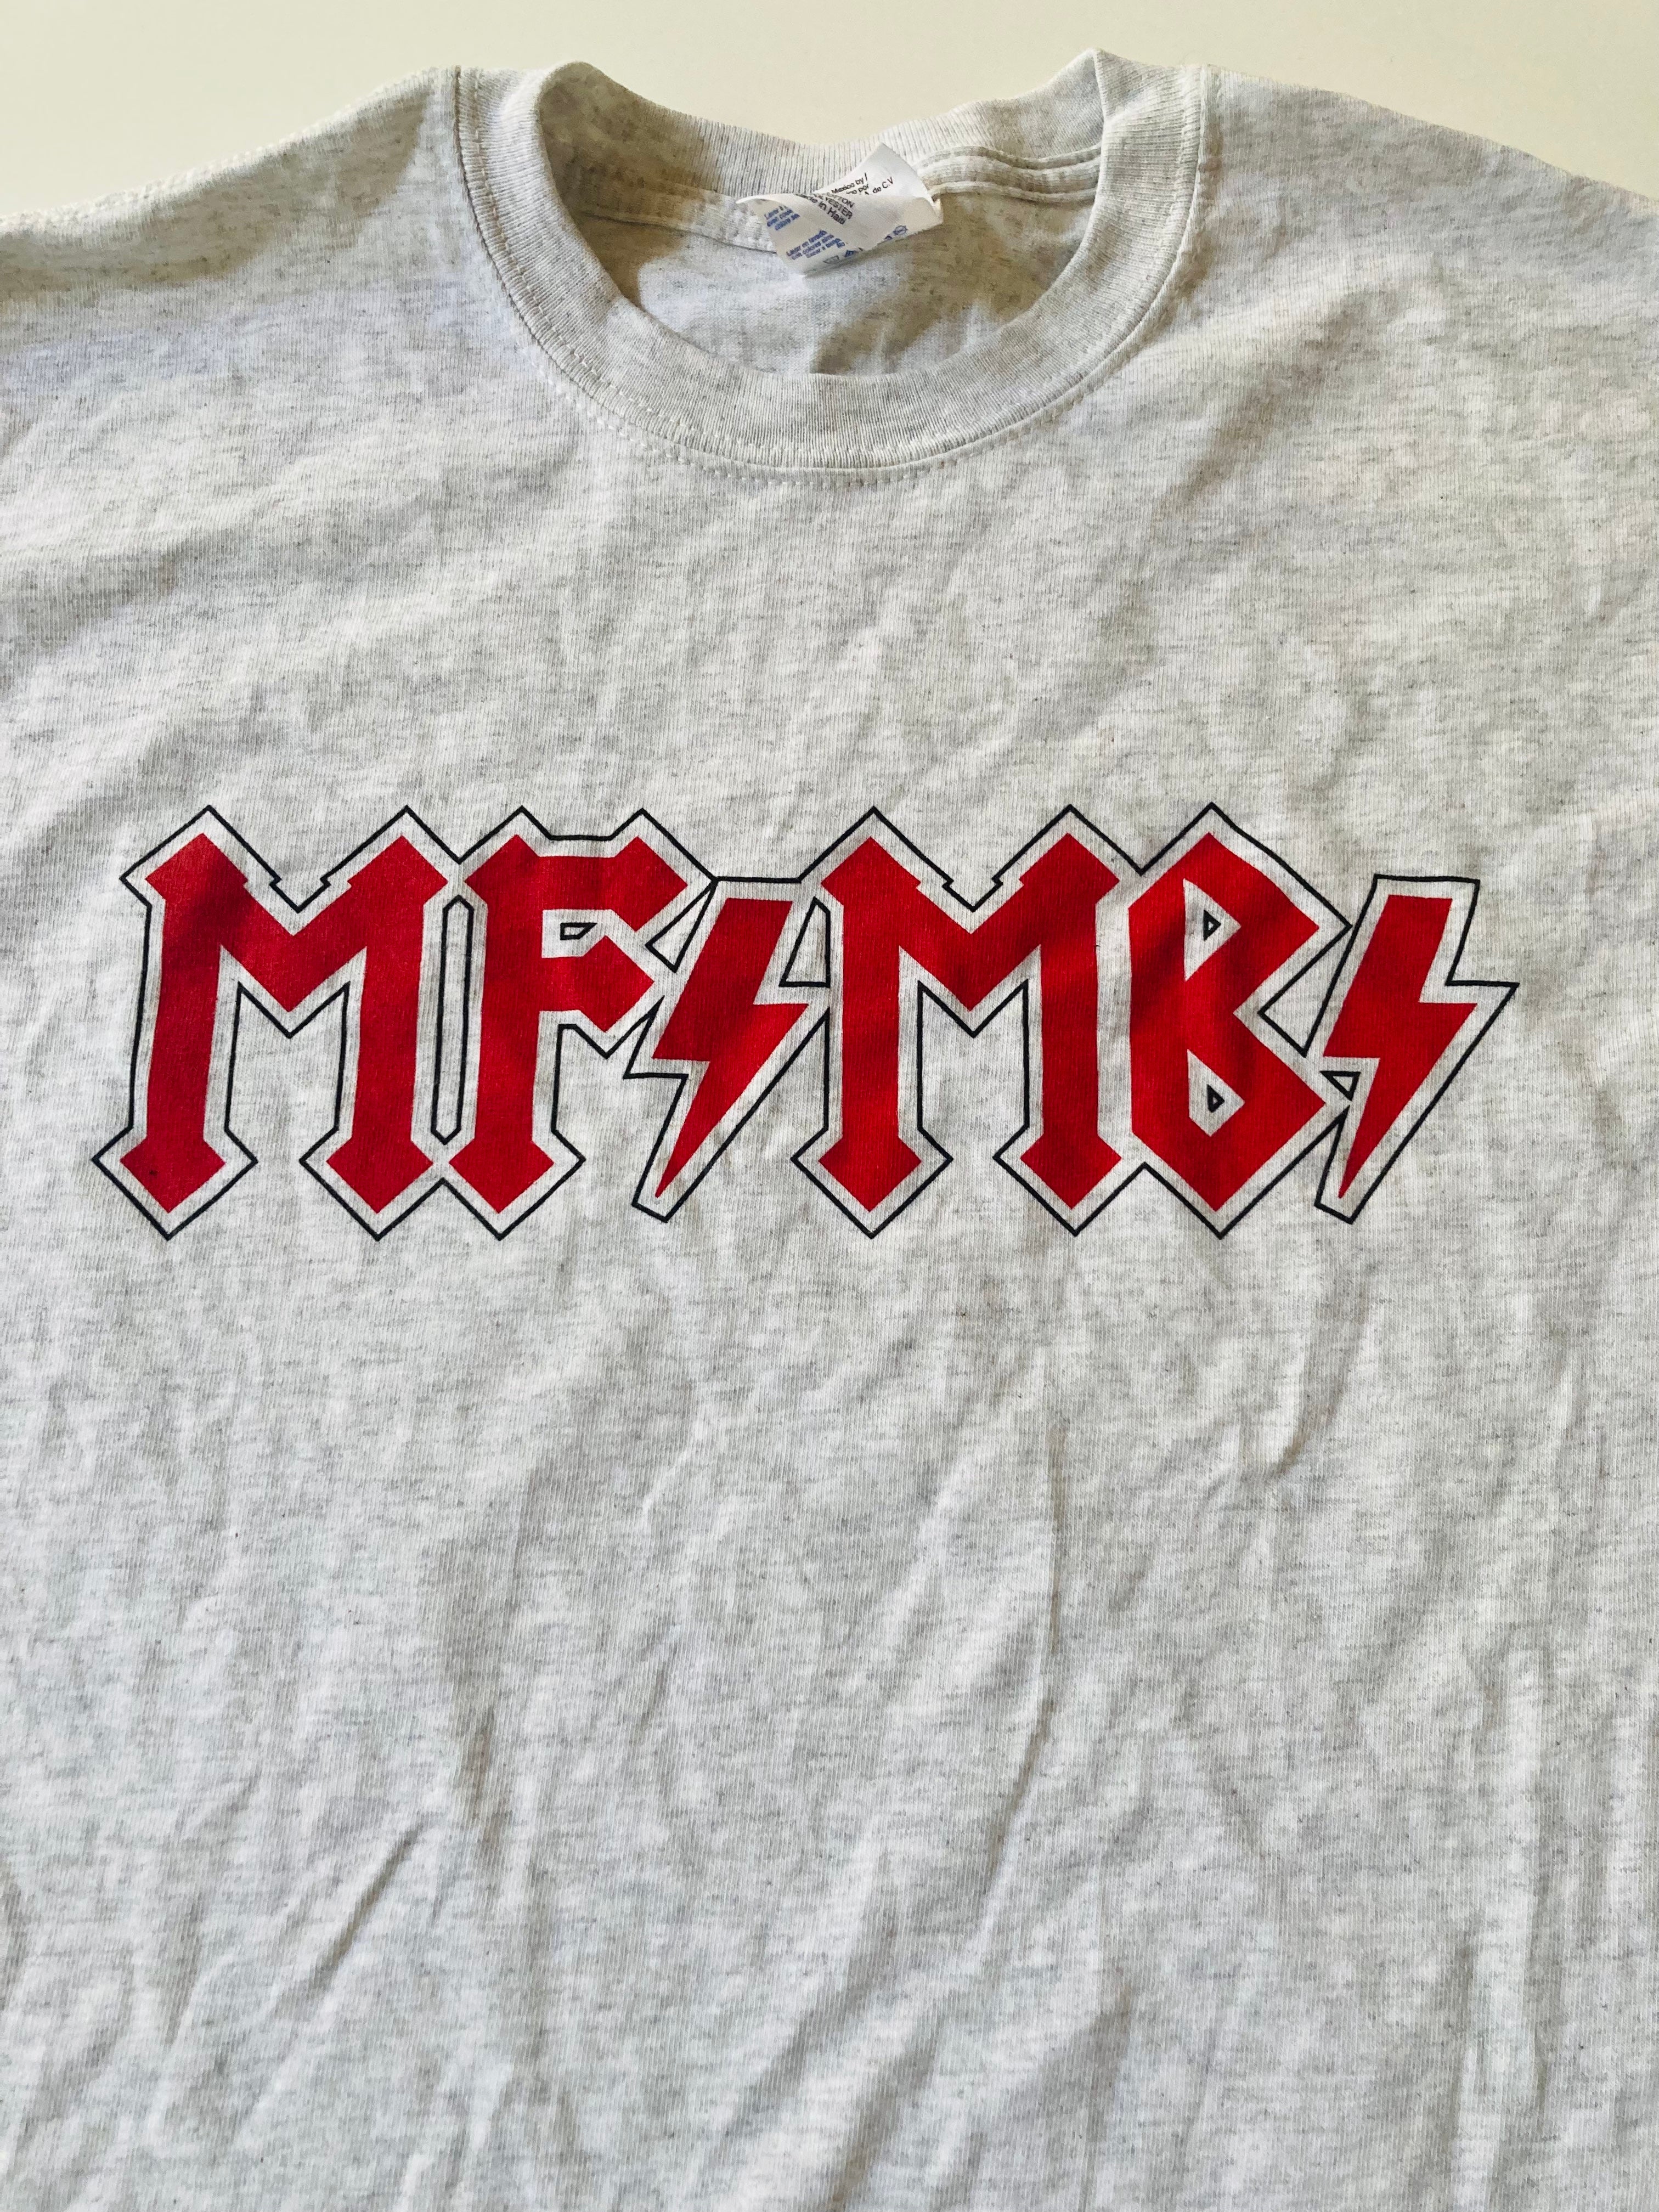 MF/MB/ - Classic T-shirt design - Gray with black and red print – Adrian Recordings